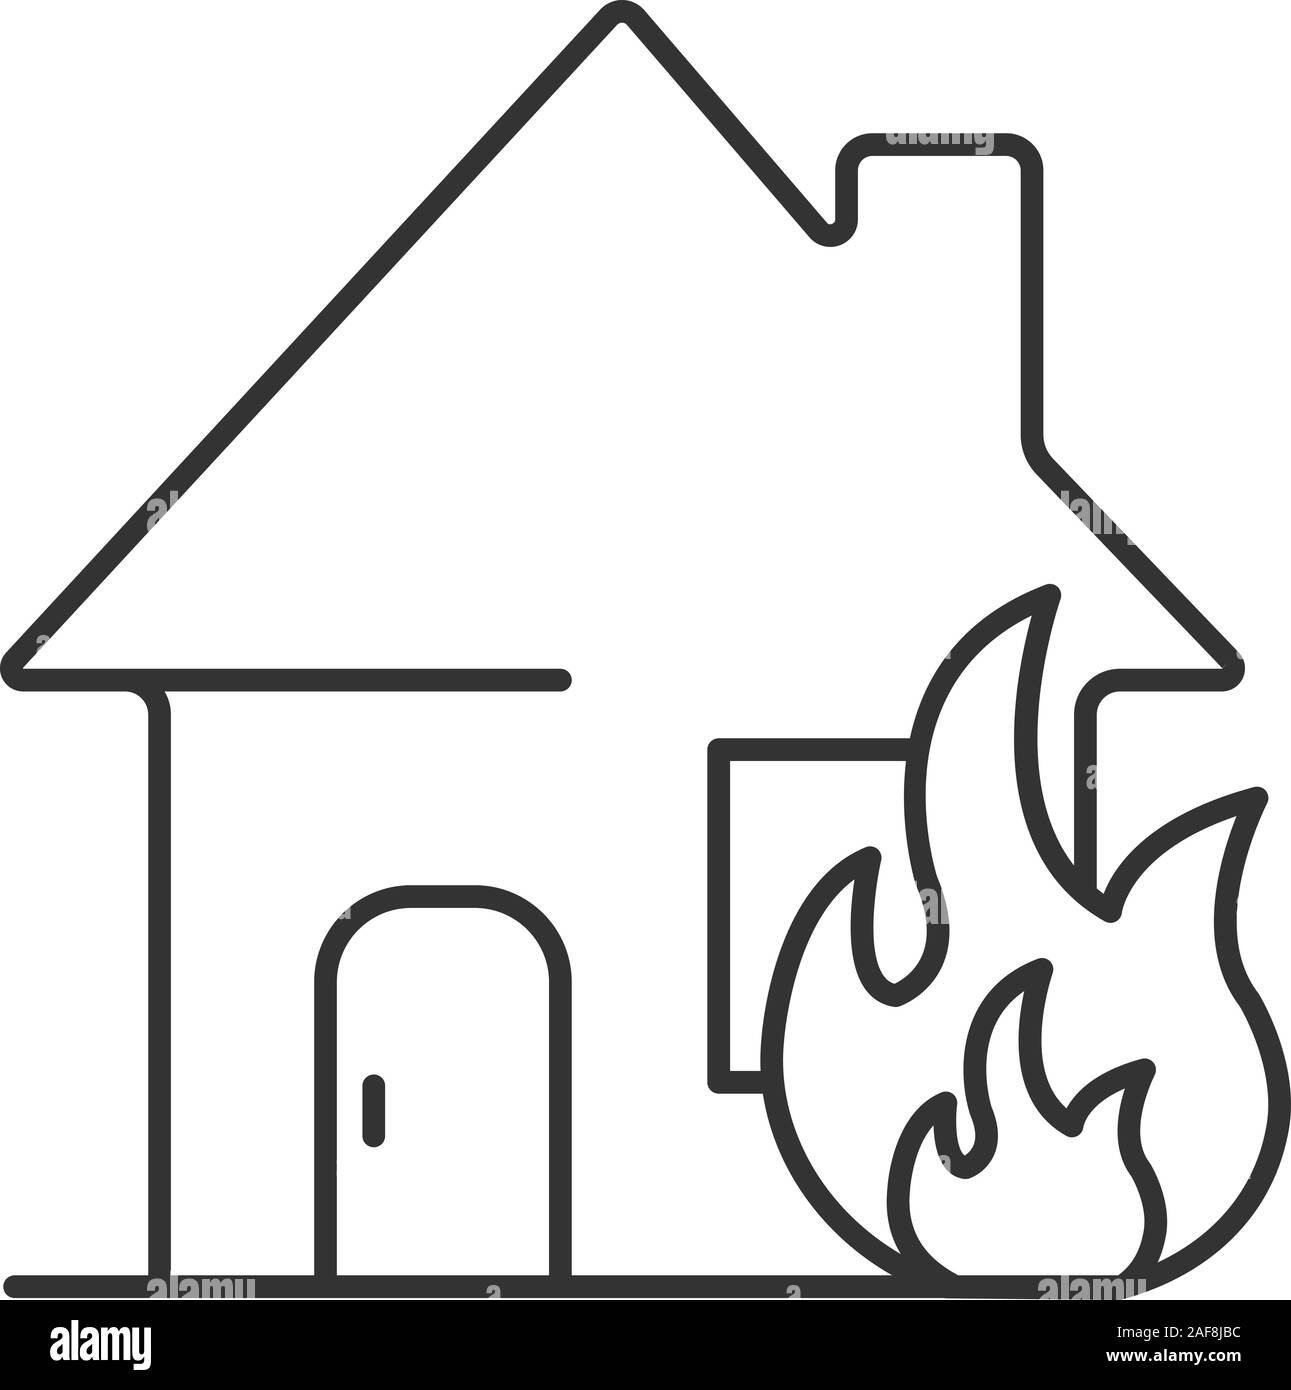 Burning house linear icon. Thin line illustration. House on fire ...